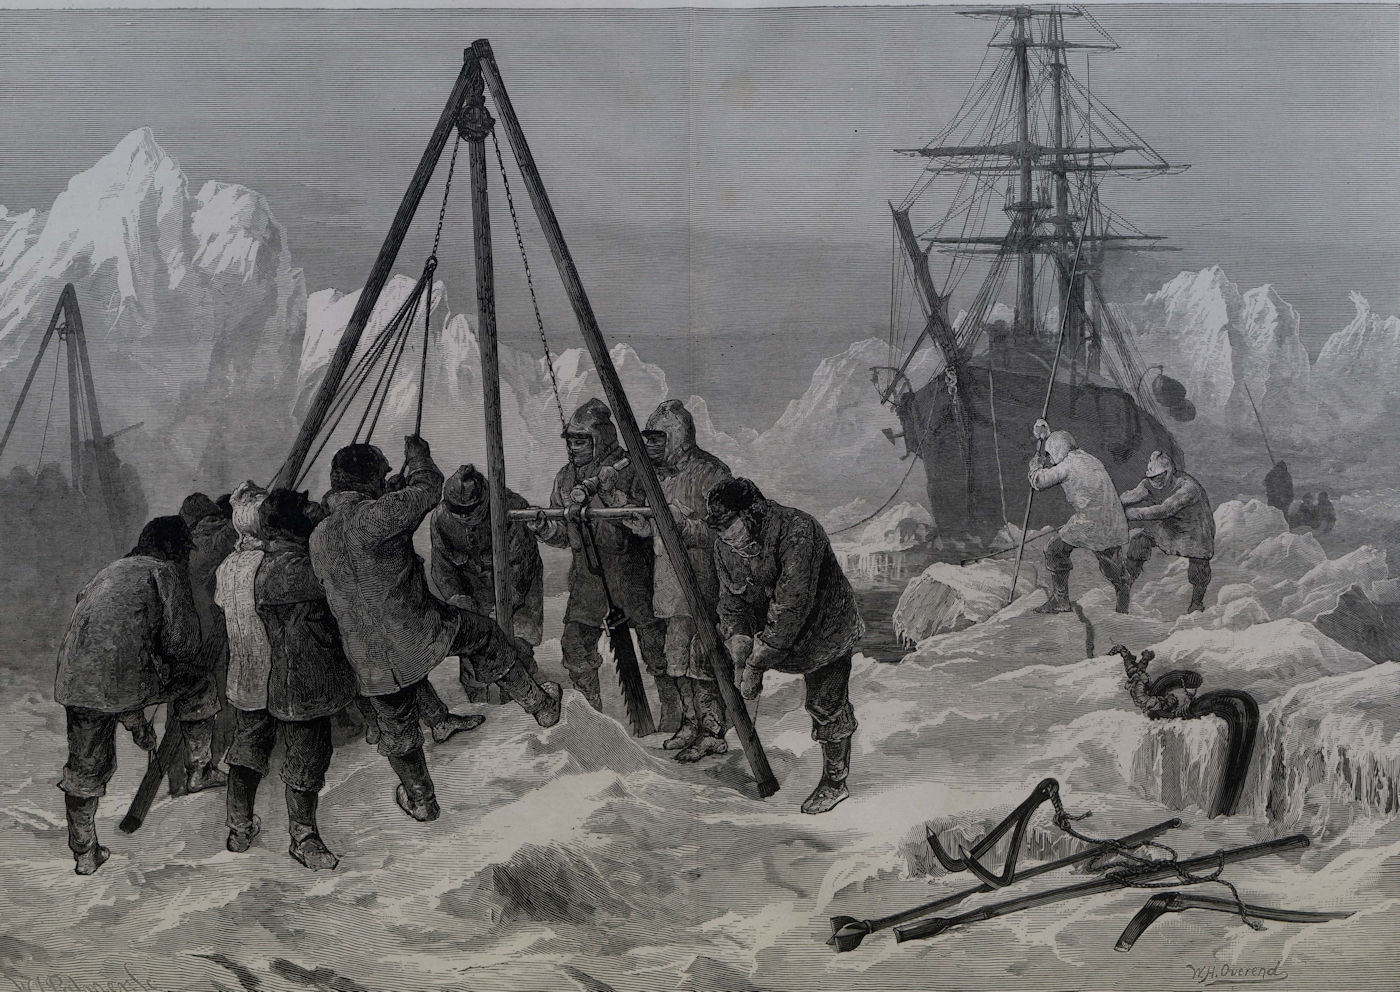 Associate Product Arctic life: cutting a way out of the ice from winter quarters. Explorers 1875